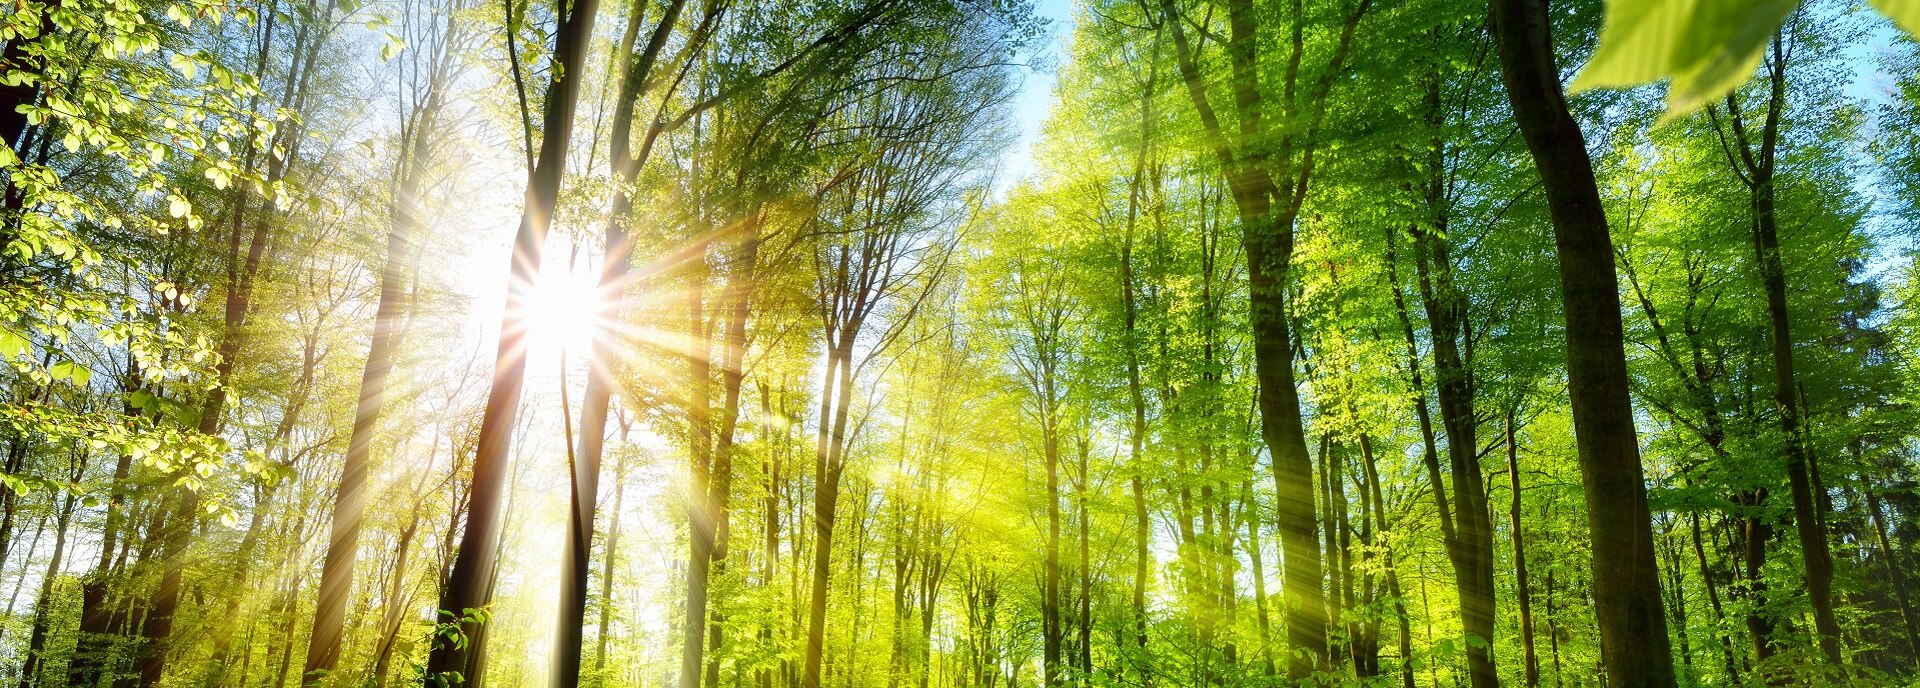 Sunshine streaming through trees in a forest